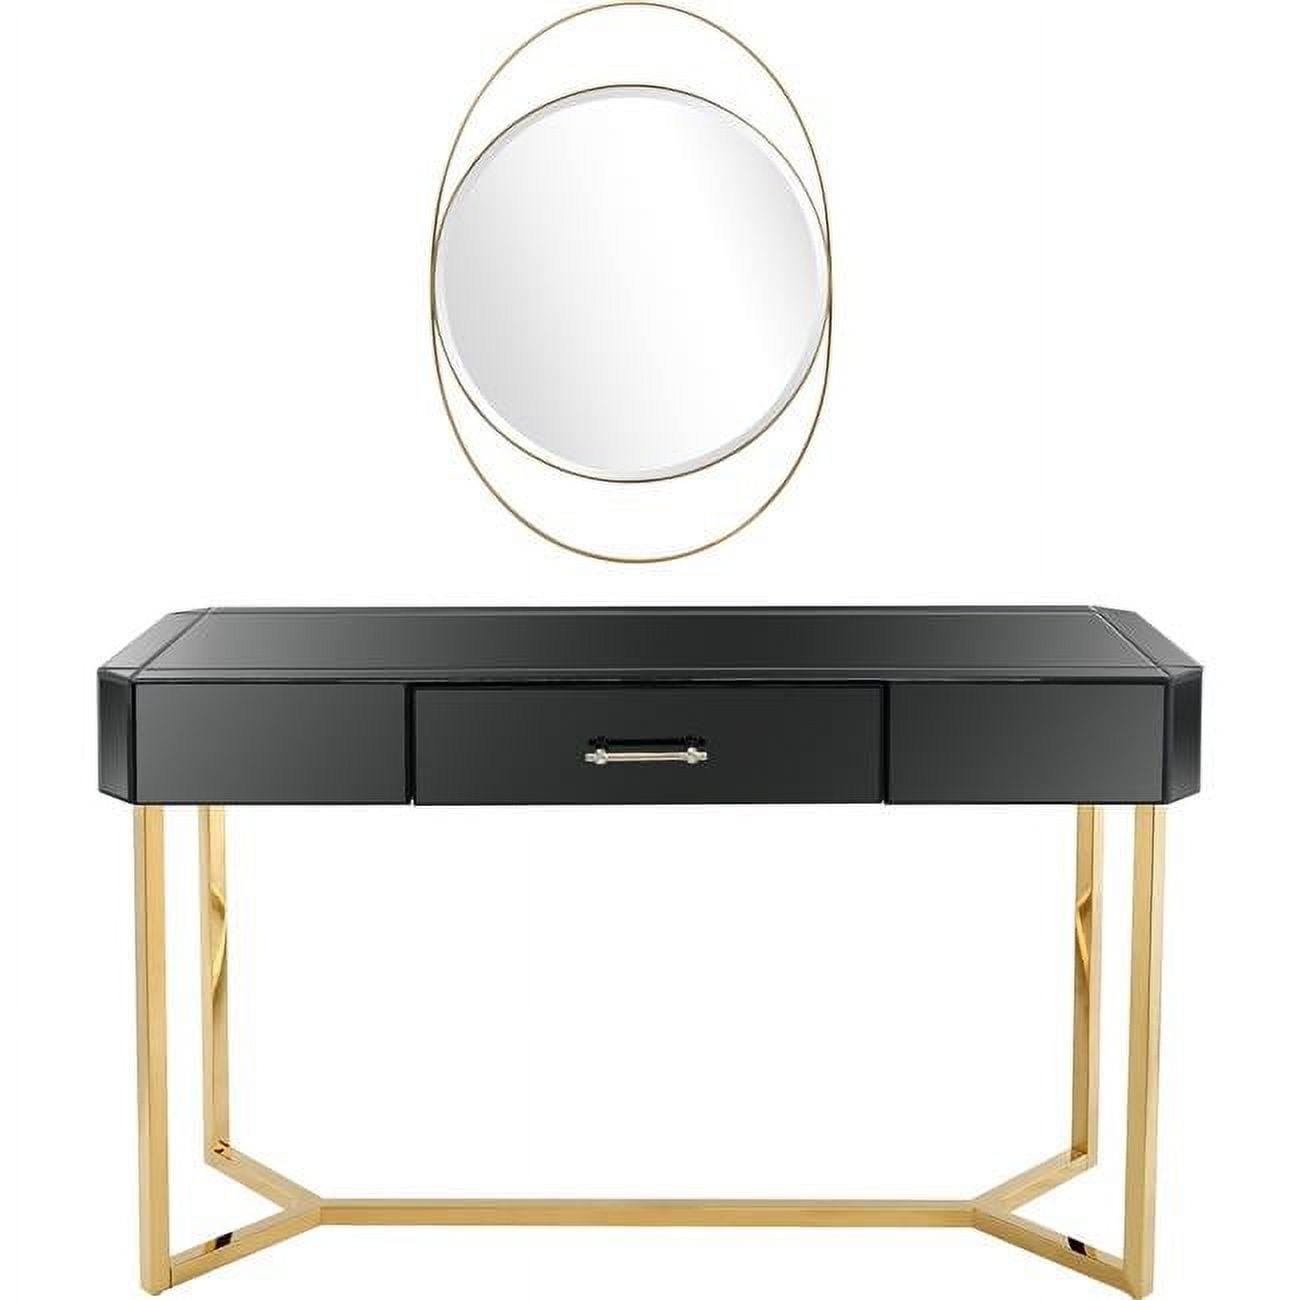 Sonya Gold-Black Mirrored Console Table with Oval Accent Mirror